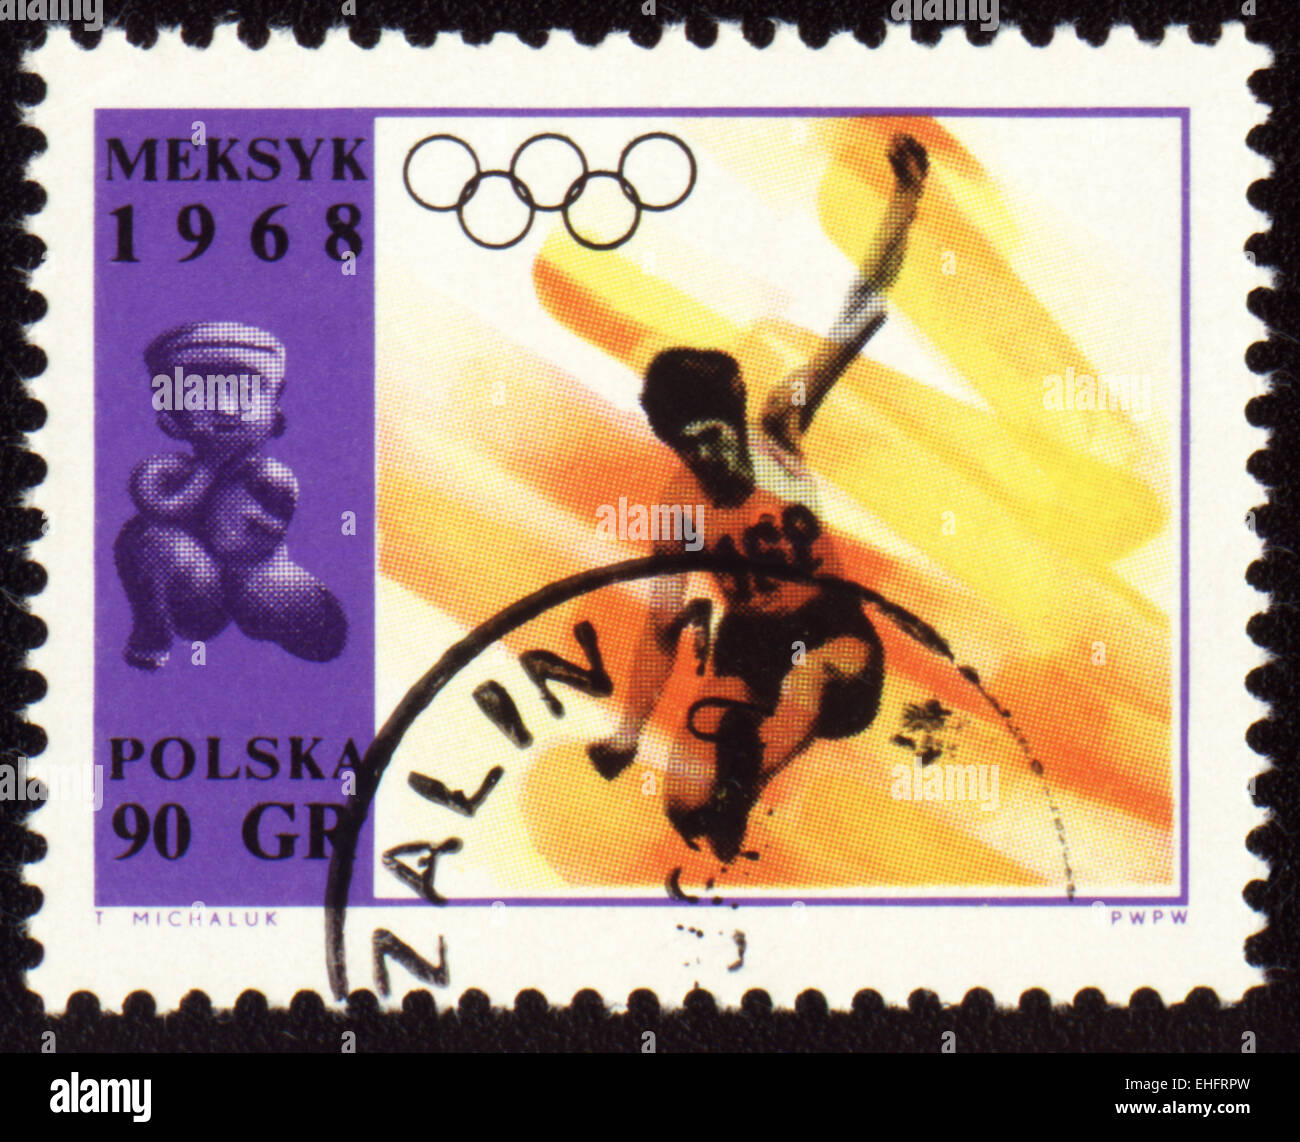 POLAND - CIRCA 1968: A post stamp printed in Poland shows broad jump Stock Photo